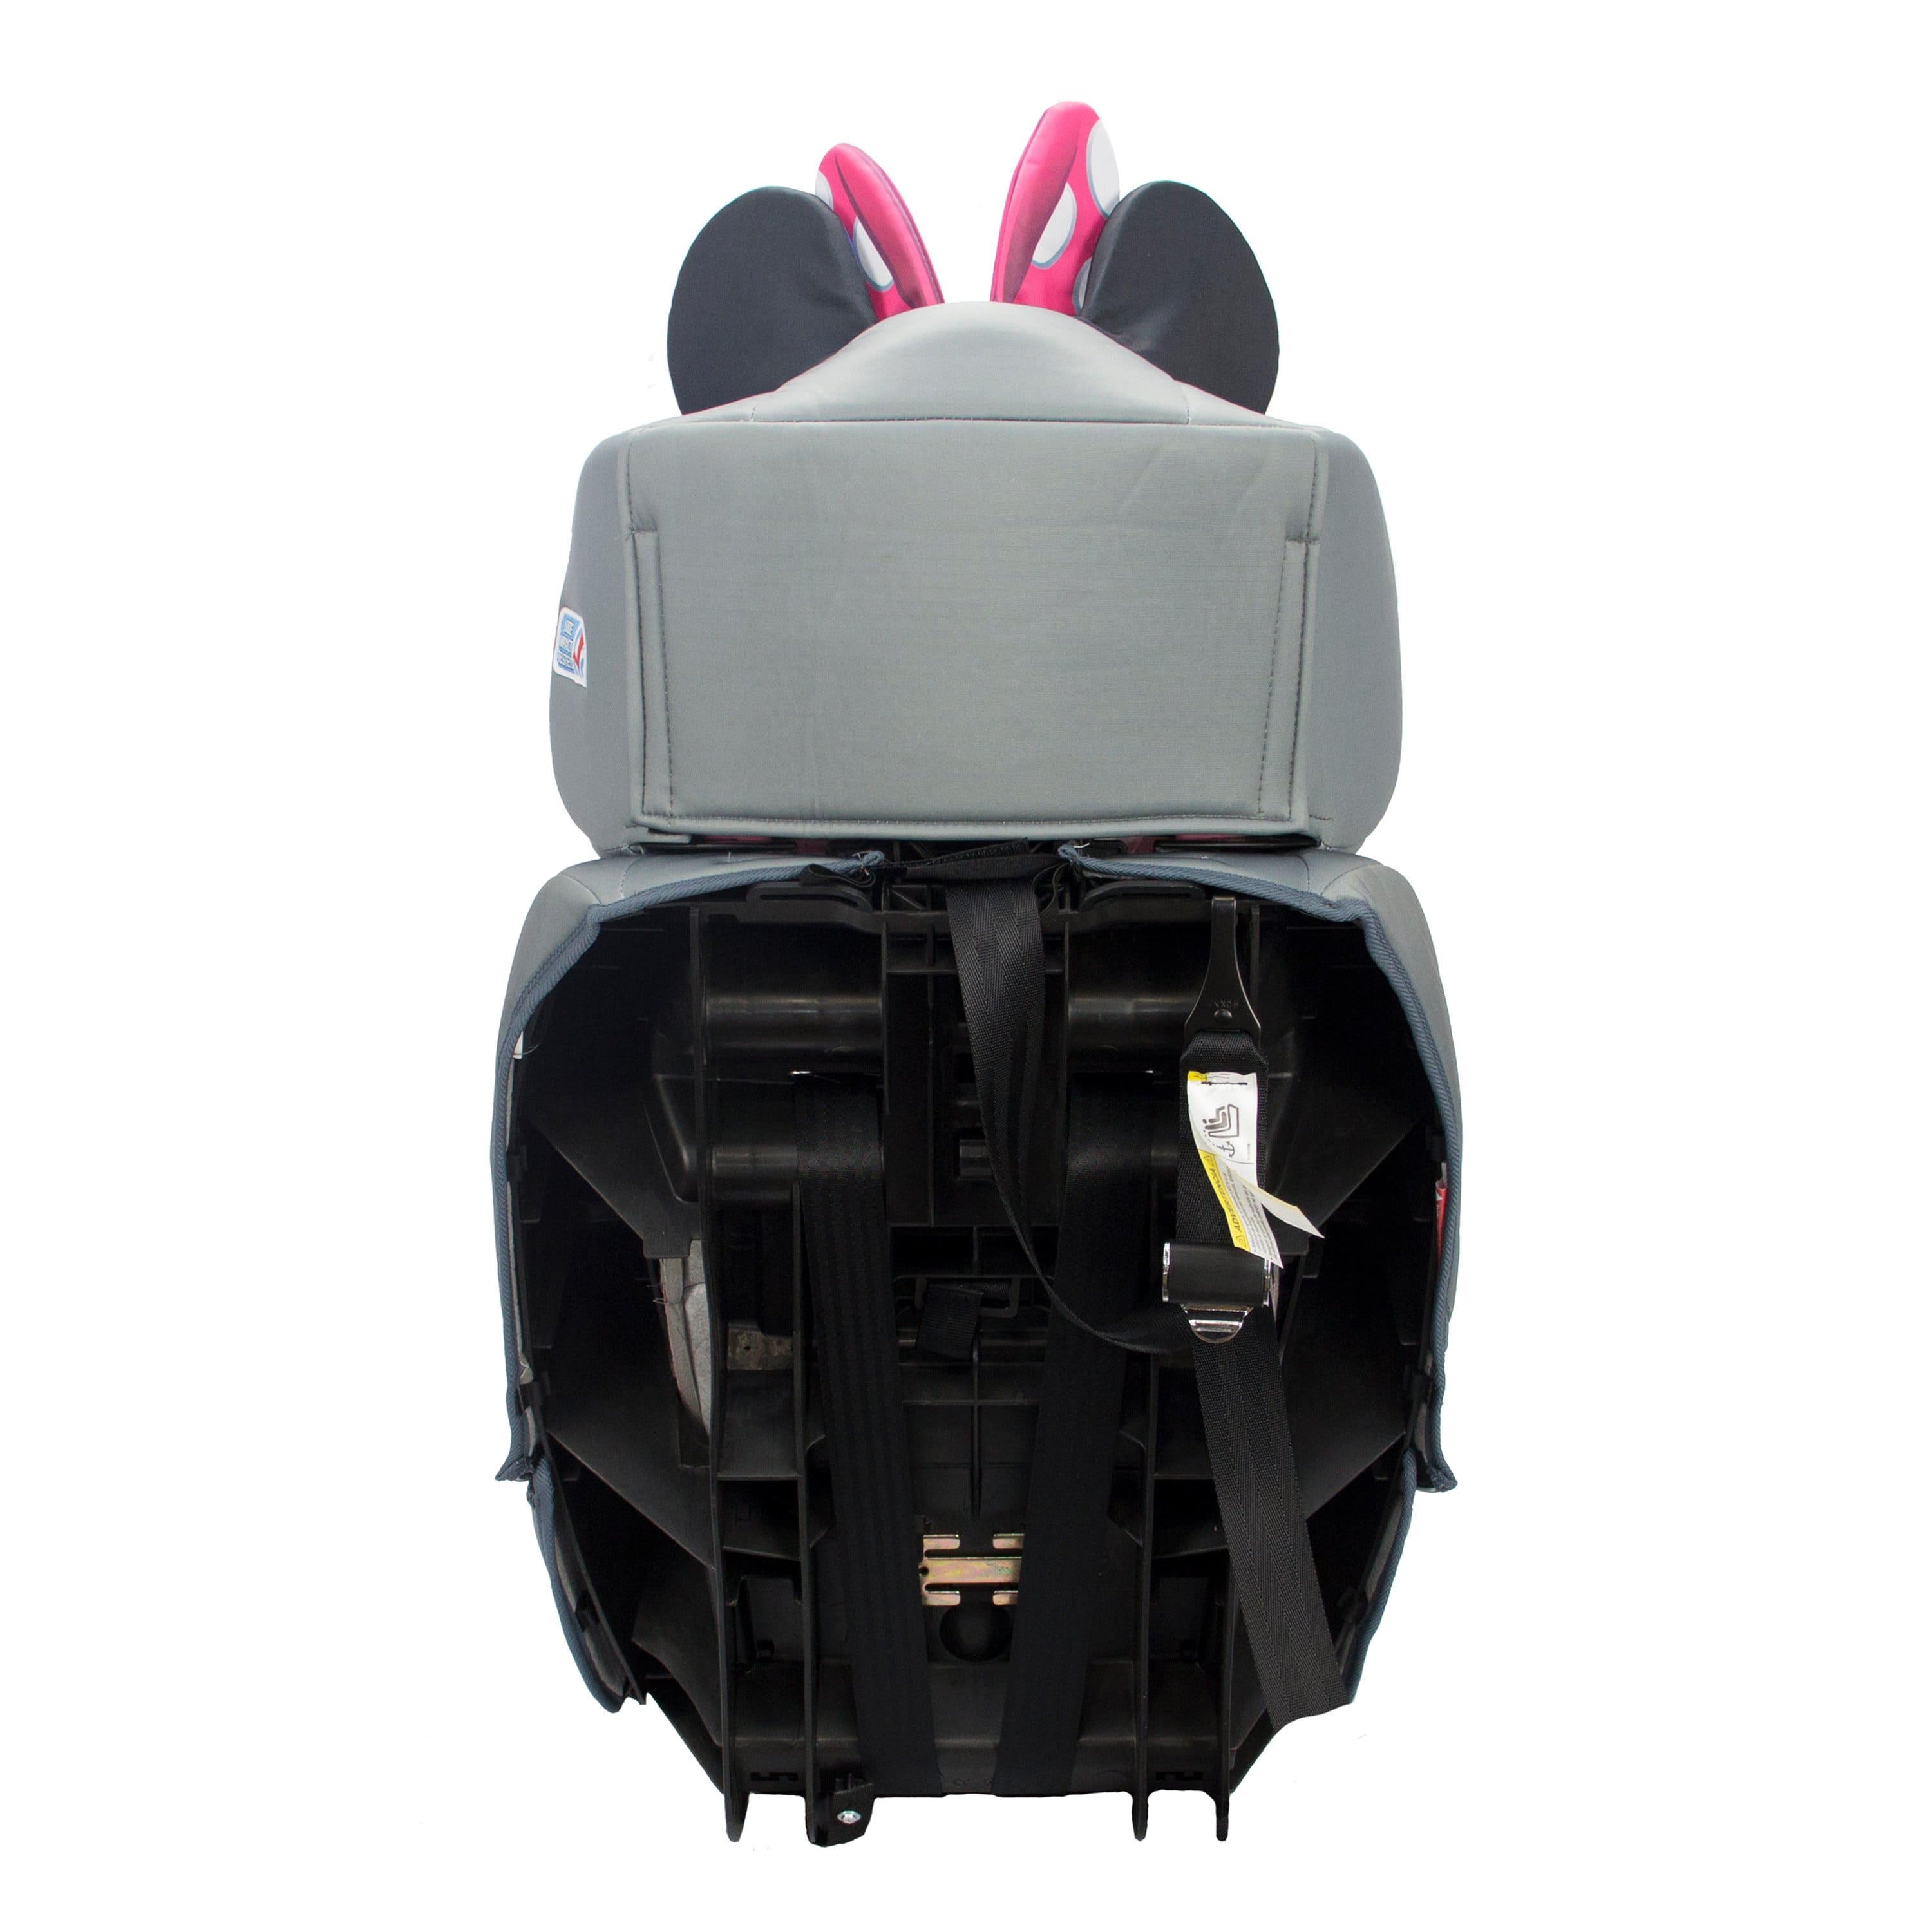 Minnie Mouse 2-in-1 Harness Booster Car Seat